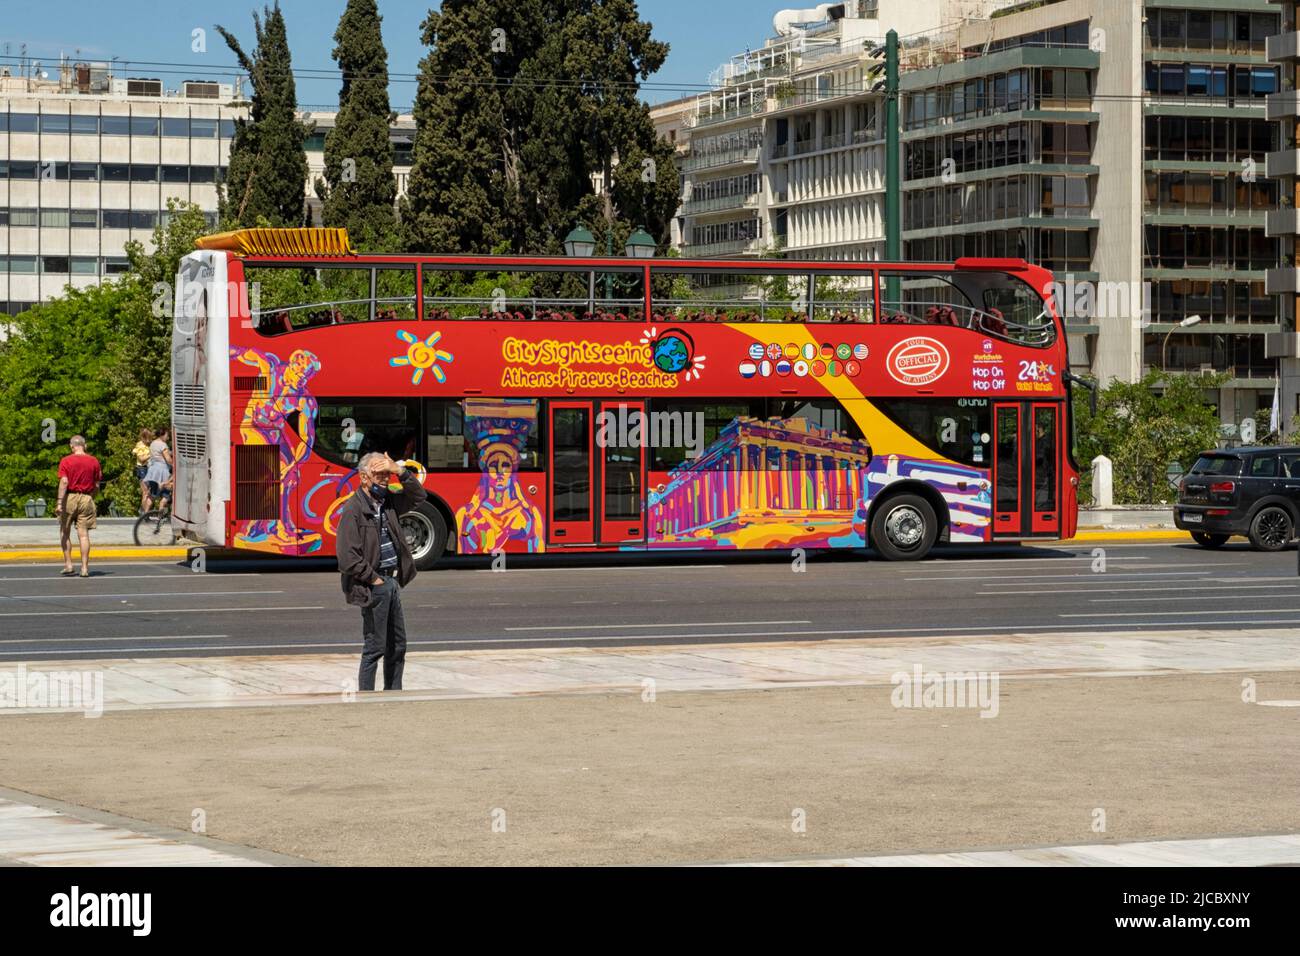 Sightseeing bus in Athens Greece Stock Photo